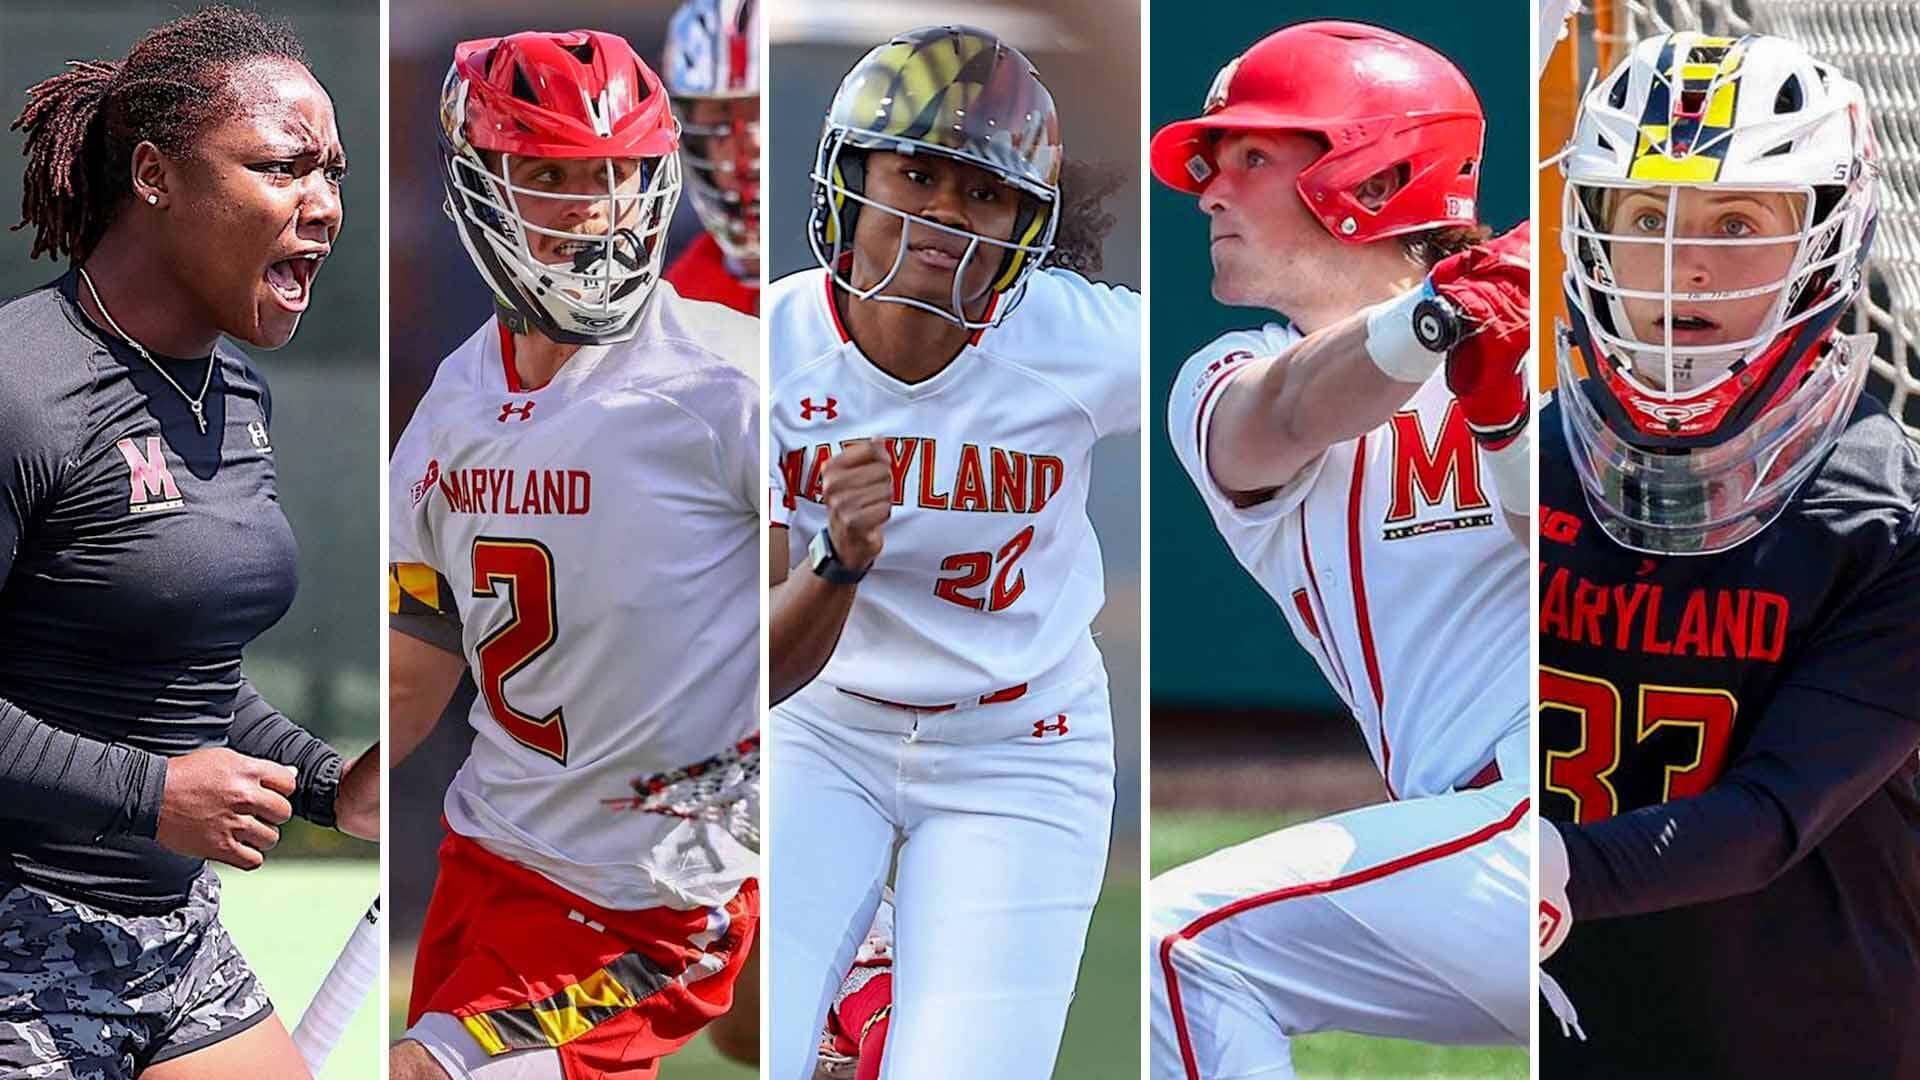 Collage of UMD tennis player, men's lacrosse player, softball player, baseball player and women's lacrosse player